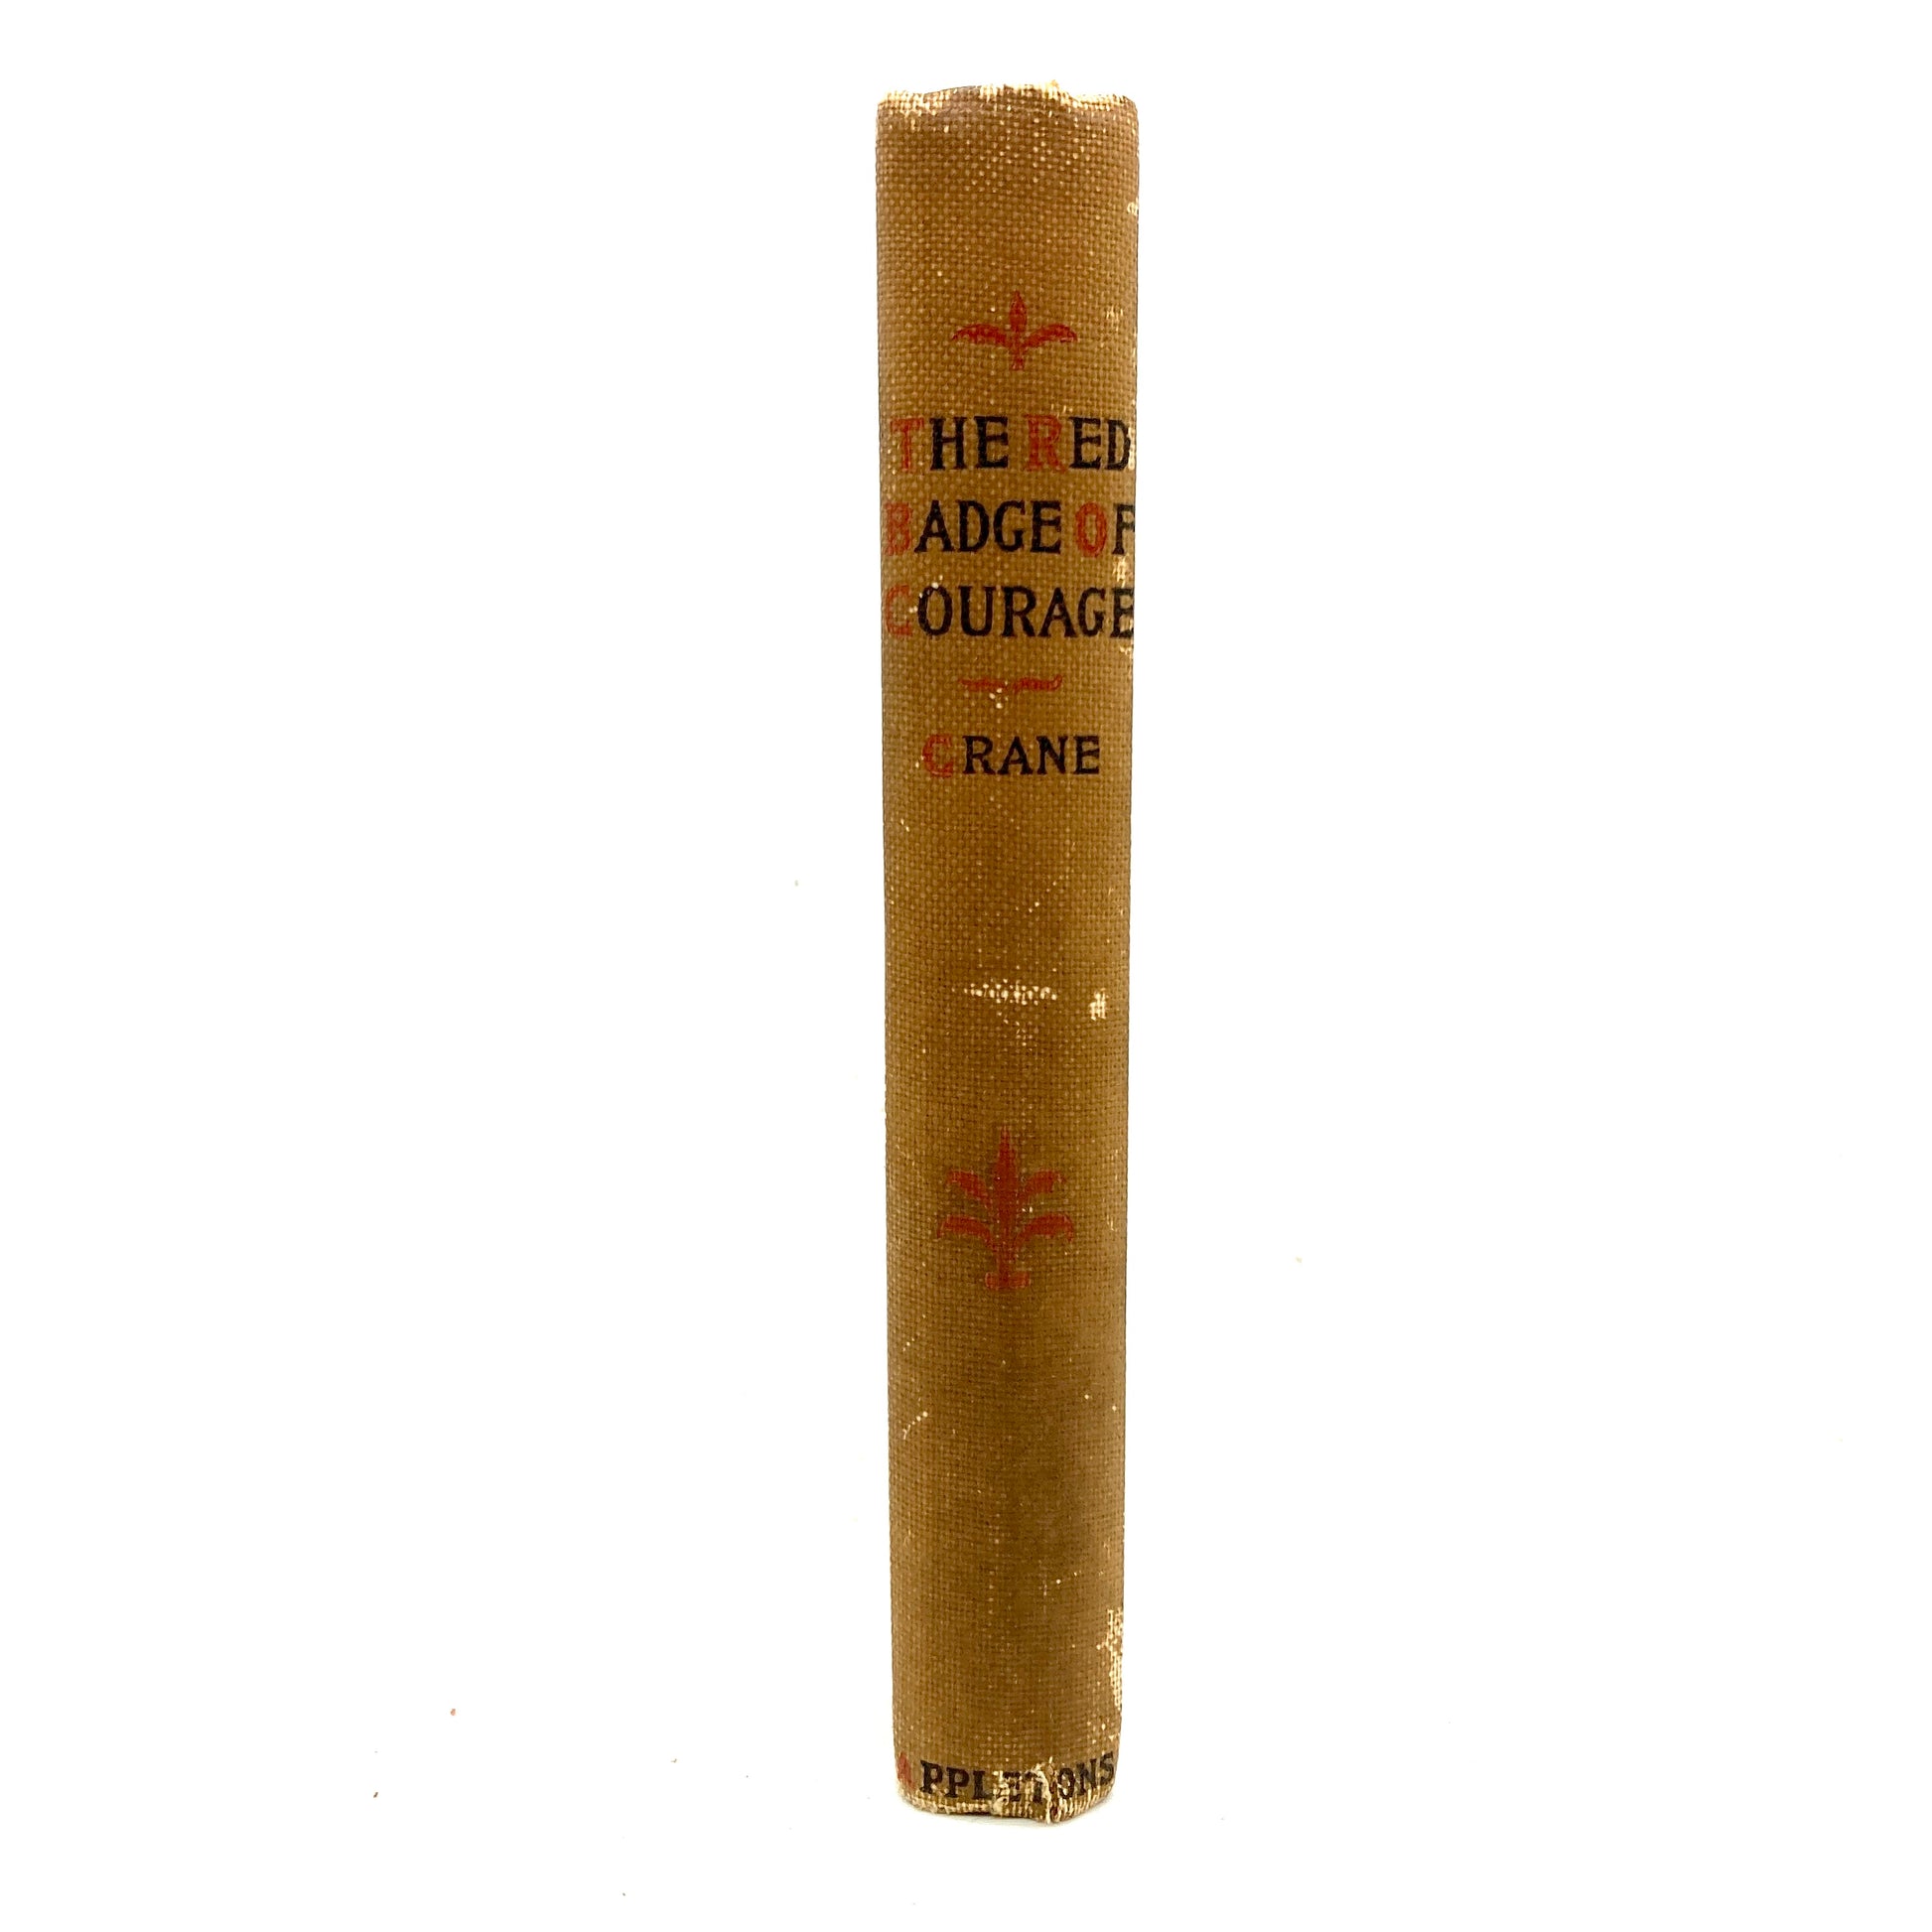 CRANE, Stephen "The Red Badge of Courage" [D. Appleton & Co, 1896] 1st Edition - Buzz Bookstore